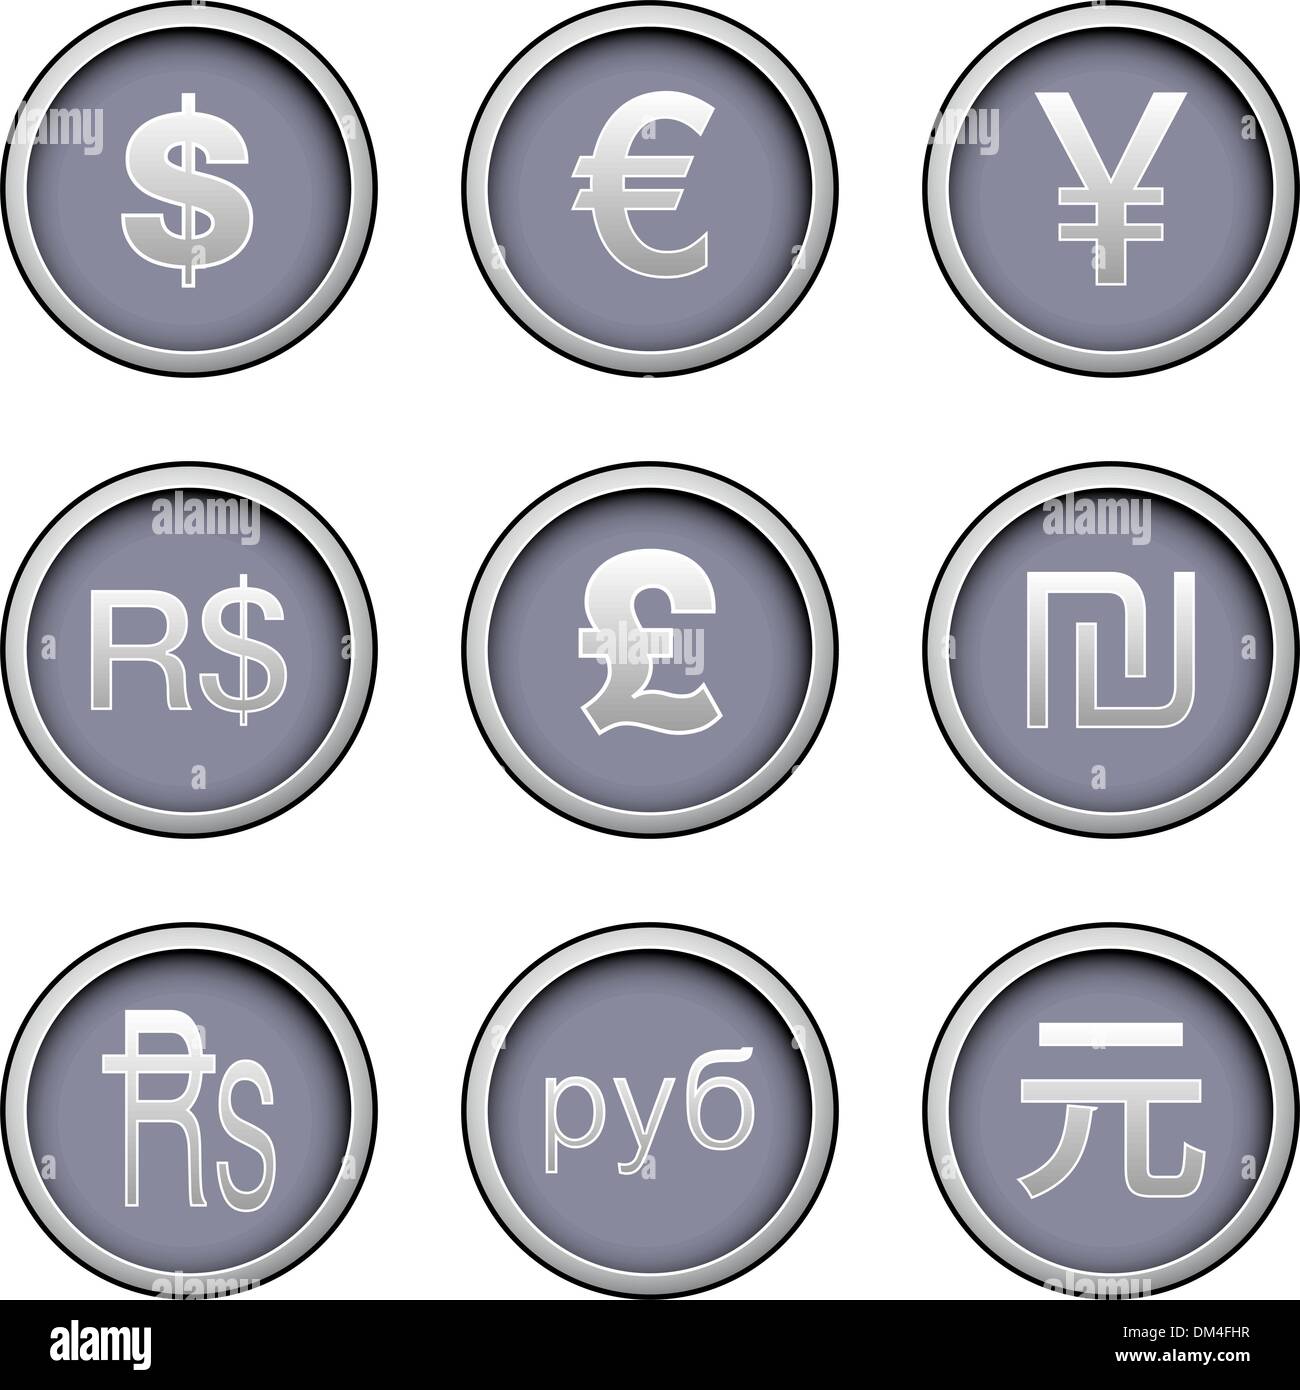 International currency symbol web icons Stock Vector